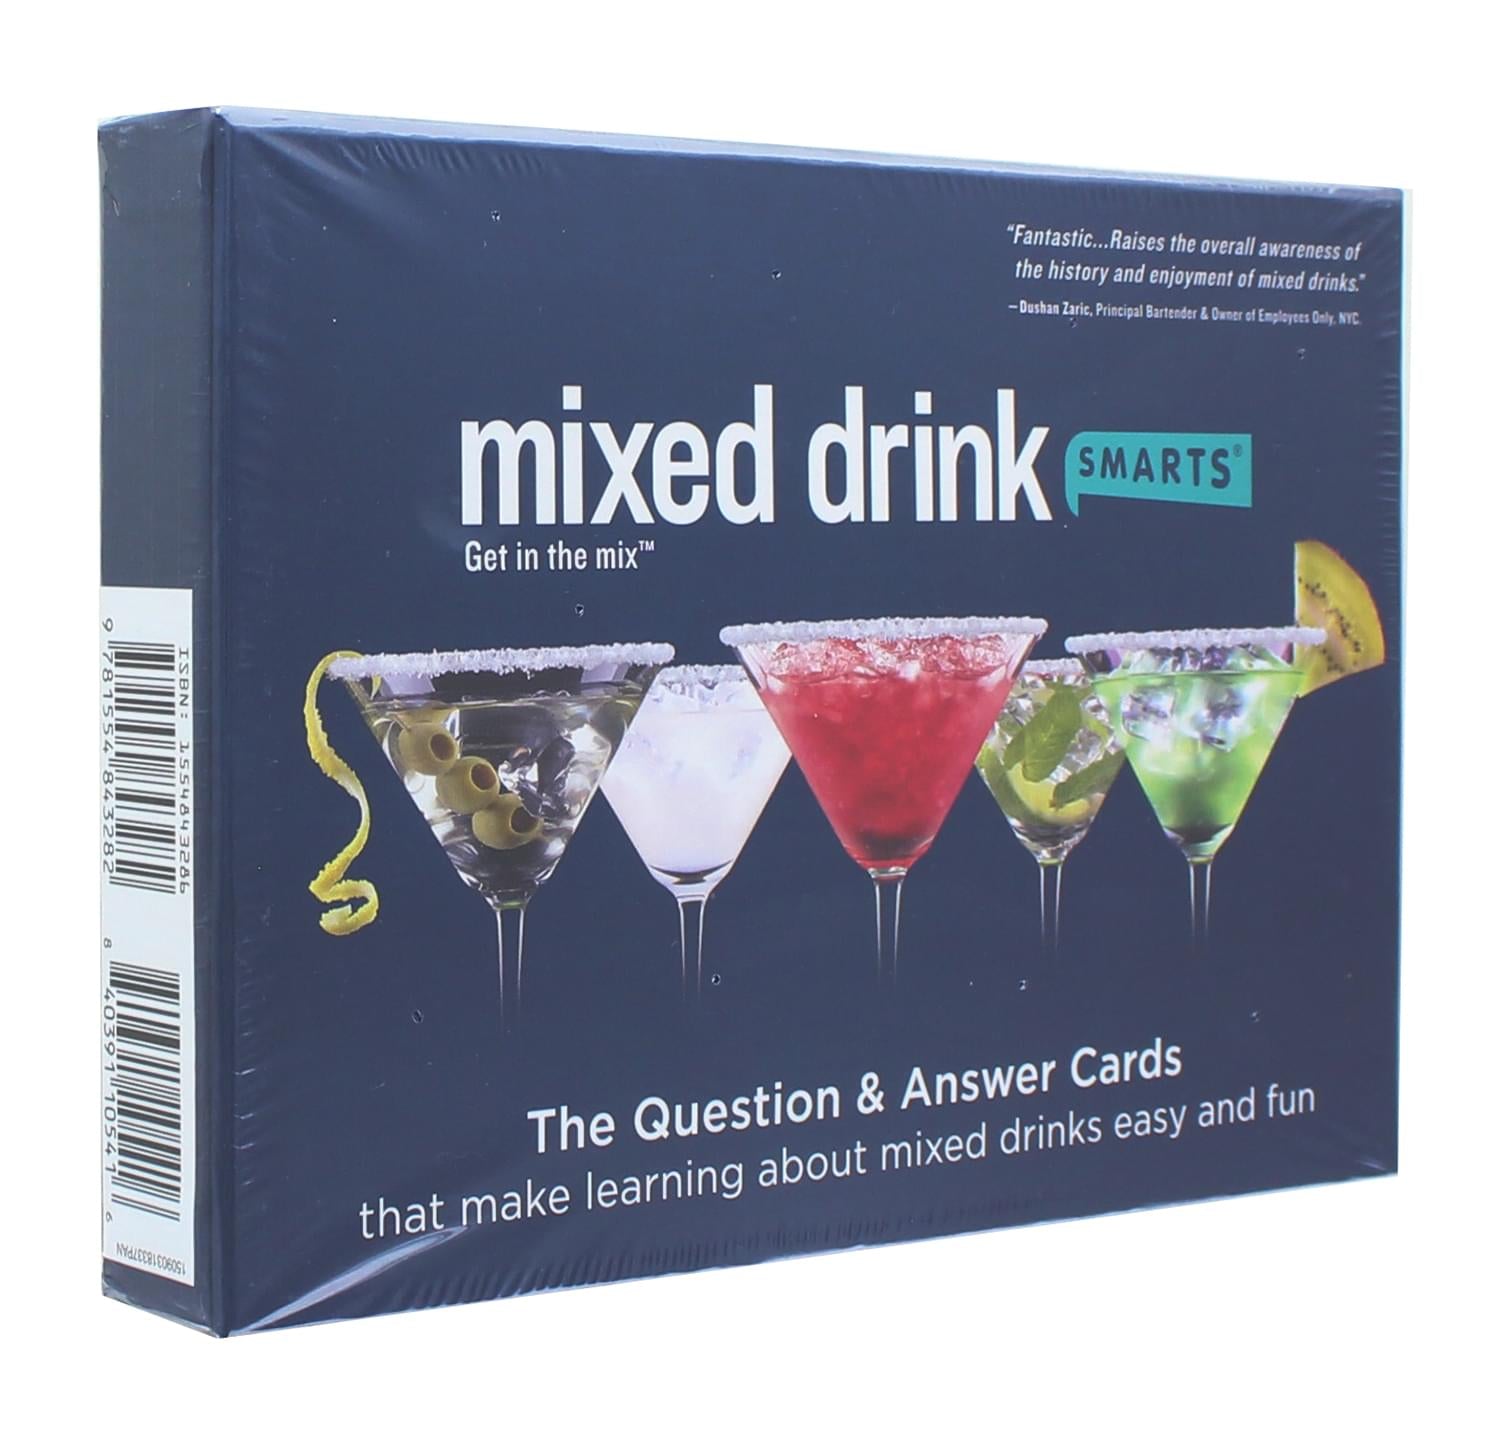 Mixed Drink Smarts Adult Question Answer Trivia Game Free Shipping Toynk Toys